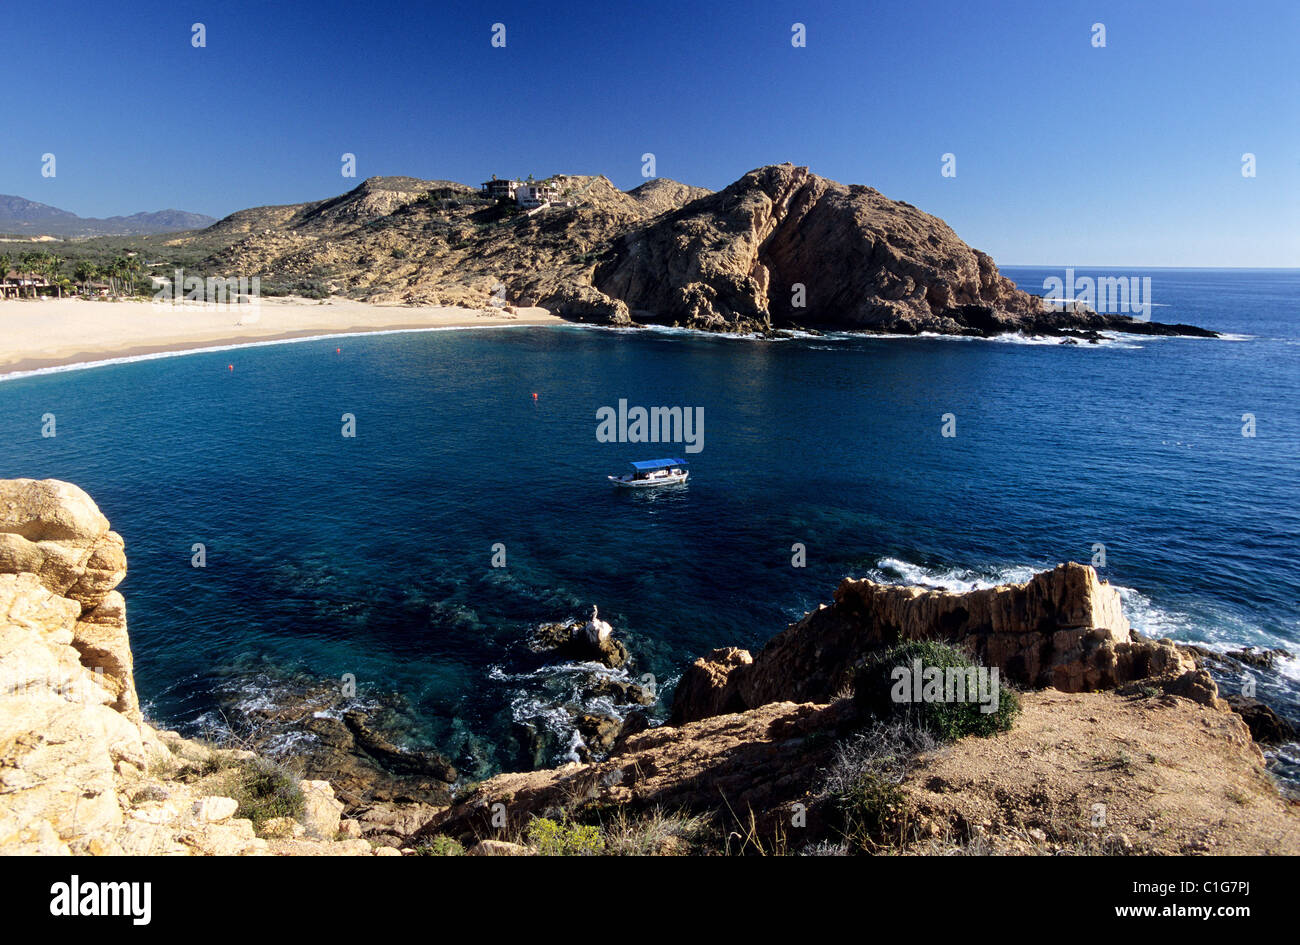 Mexico, Baja California state, Santa Maria Bay is one of the most beautiful beaches of the state Stock Photo